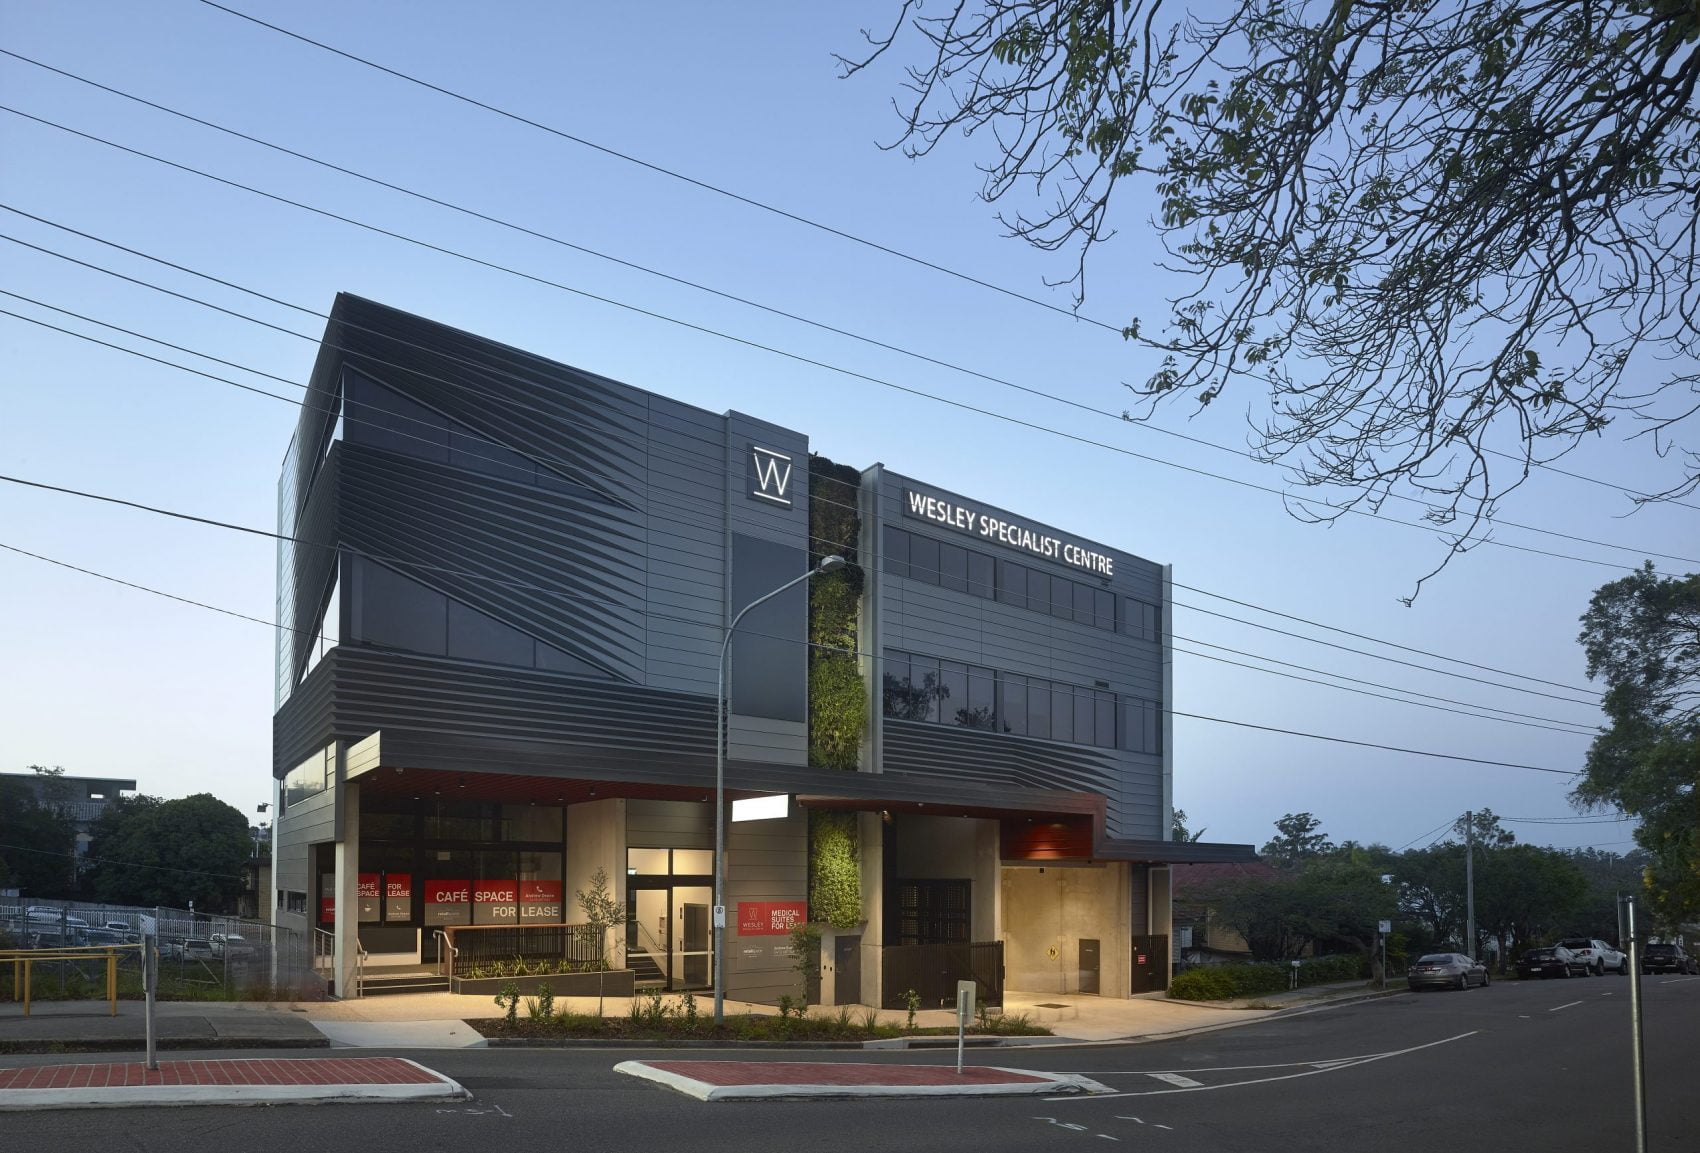 WESLEY SPECIALIST CENTRE BY CLEMENTS CLARKE ARCHITECTS | Featured image for the Commercial Architect Brisbane landing page.